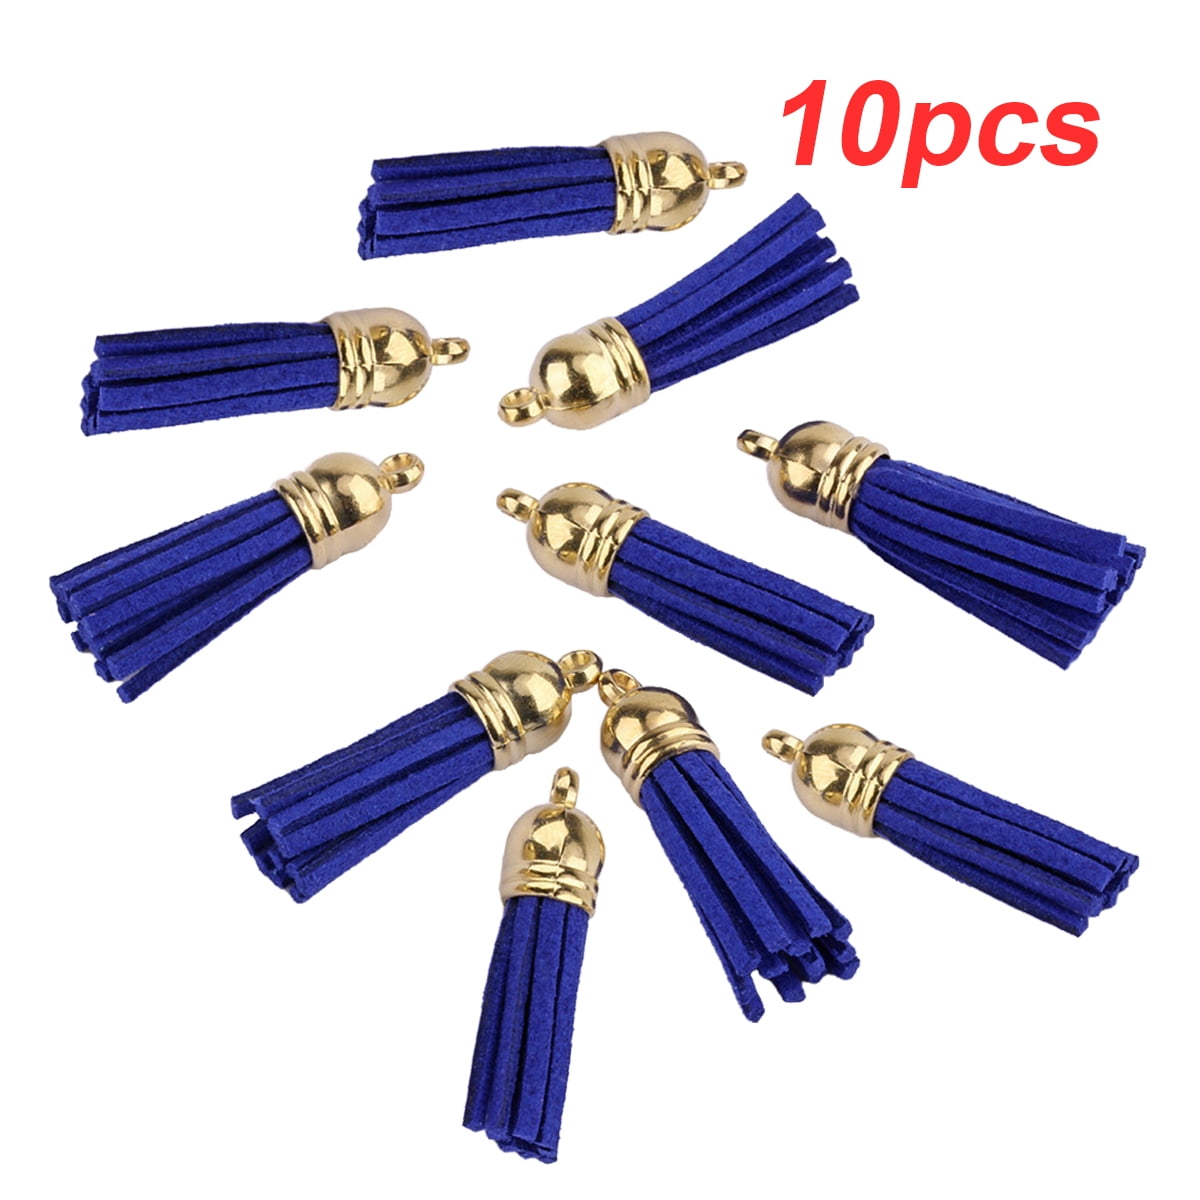 10 Pieces Keychain Charms Tassels Decorations Accessory Finding Supplies  Craft Accessories Jewelry Making Props Tassel for DIY